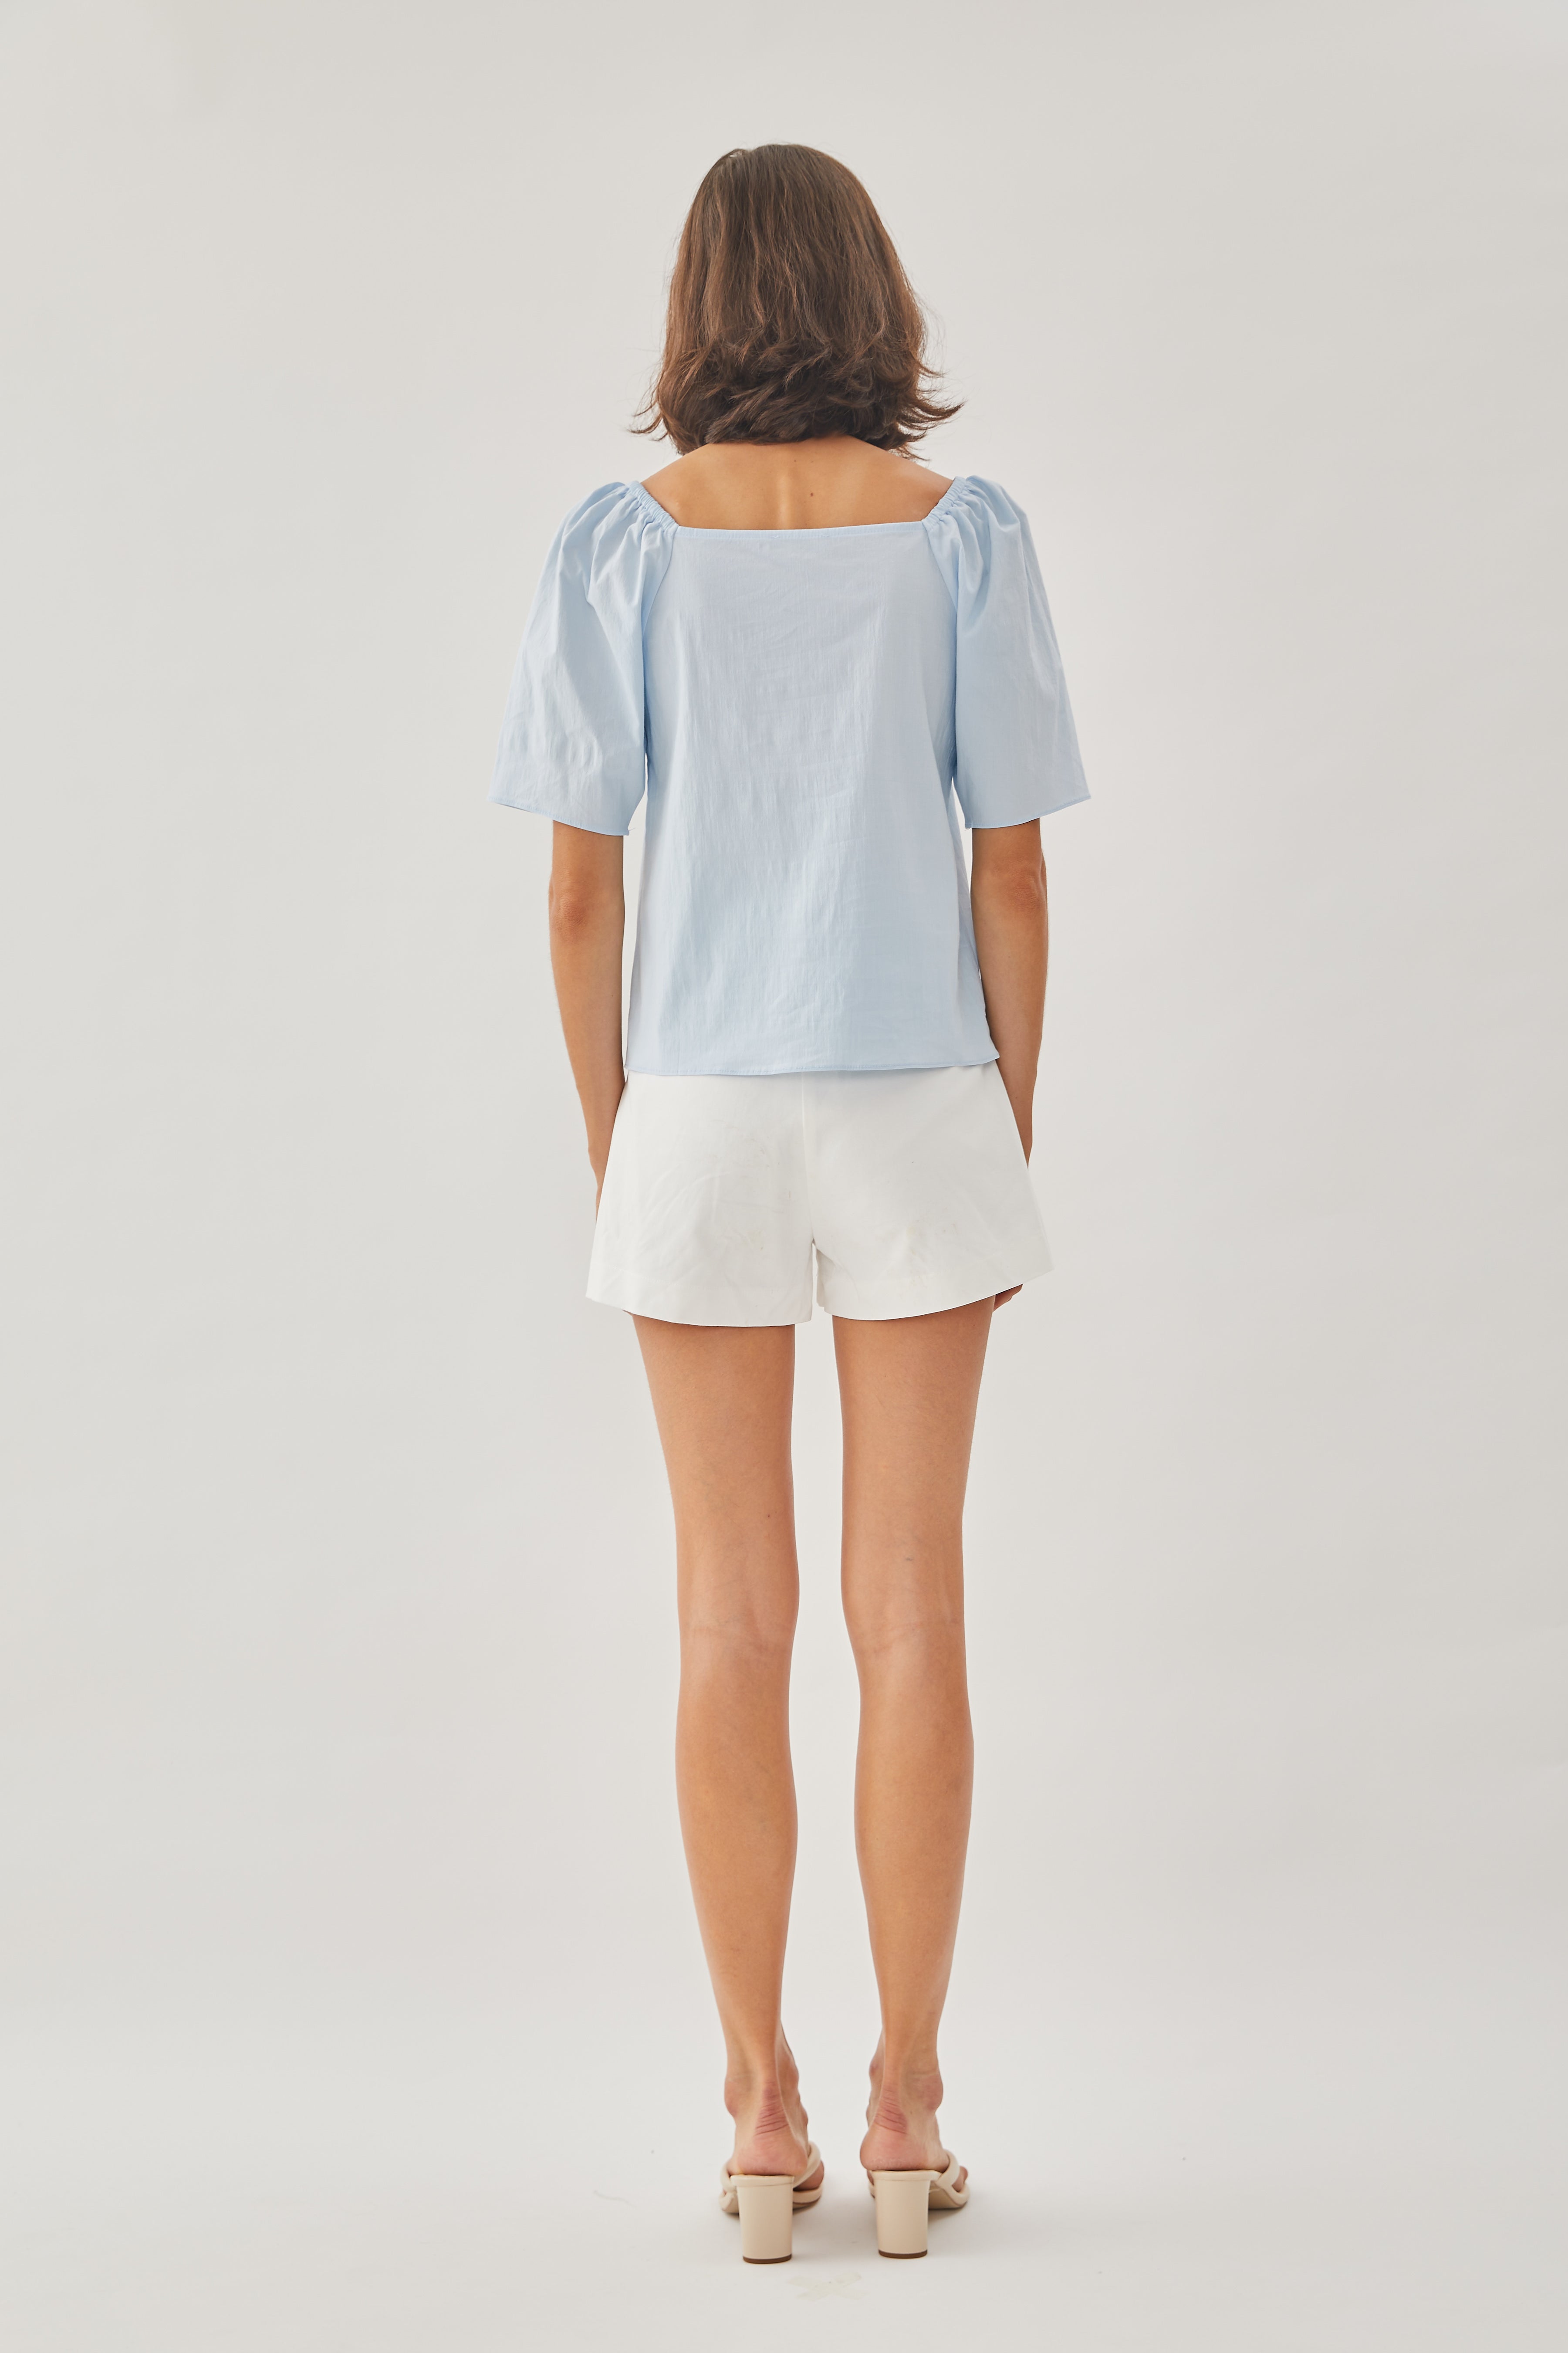 Cotton Blend Puffed Sleeved Top in Sky